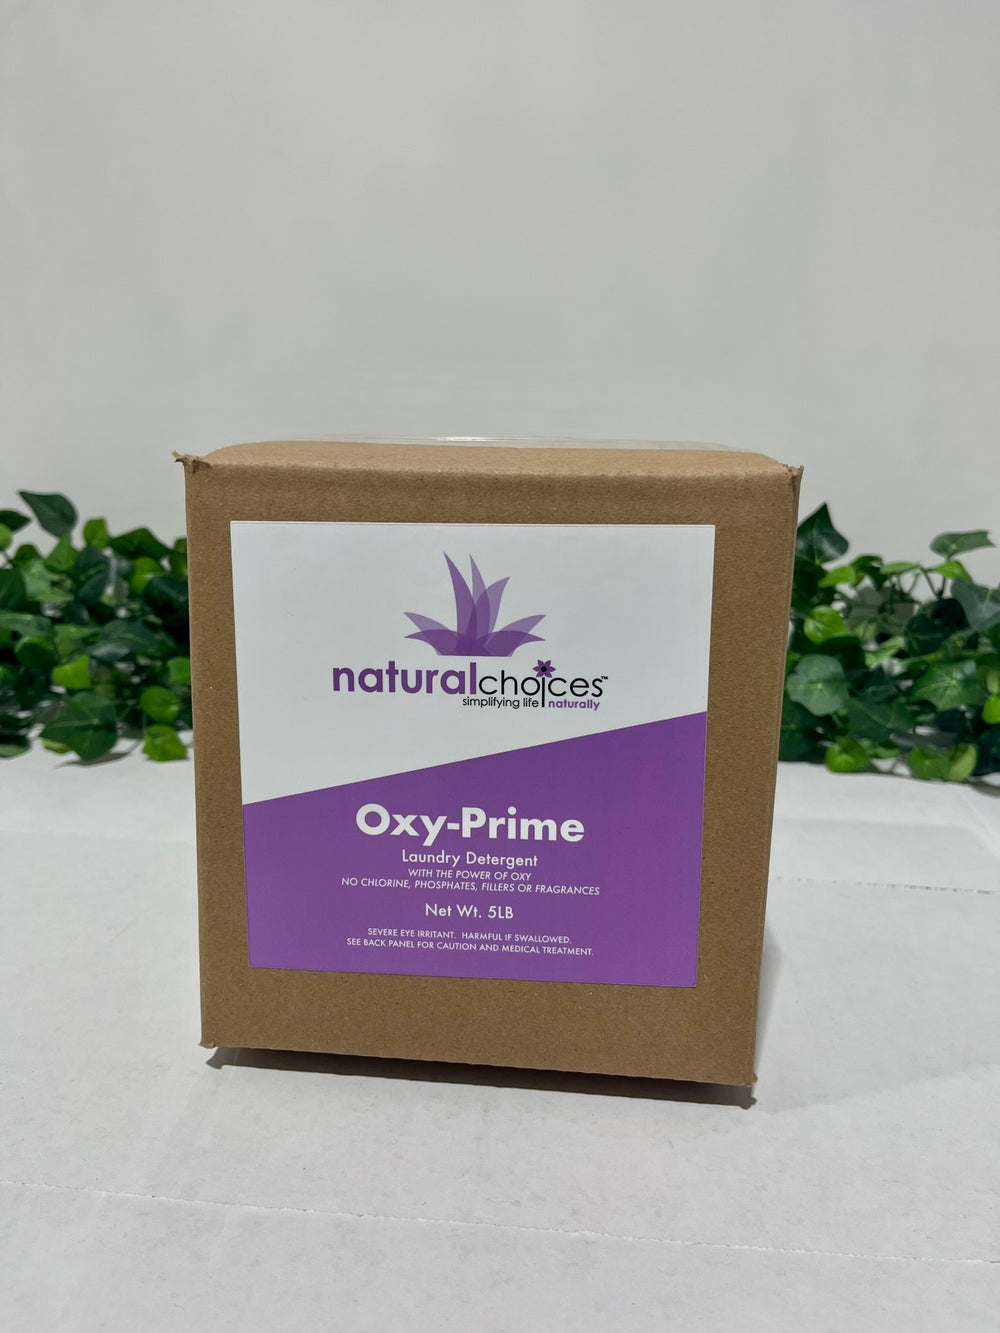 Natural Choices Oxy-Prime Laundry Detergent